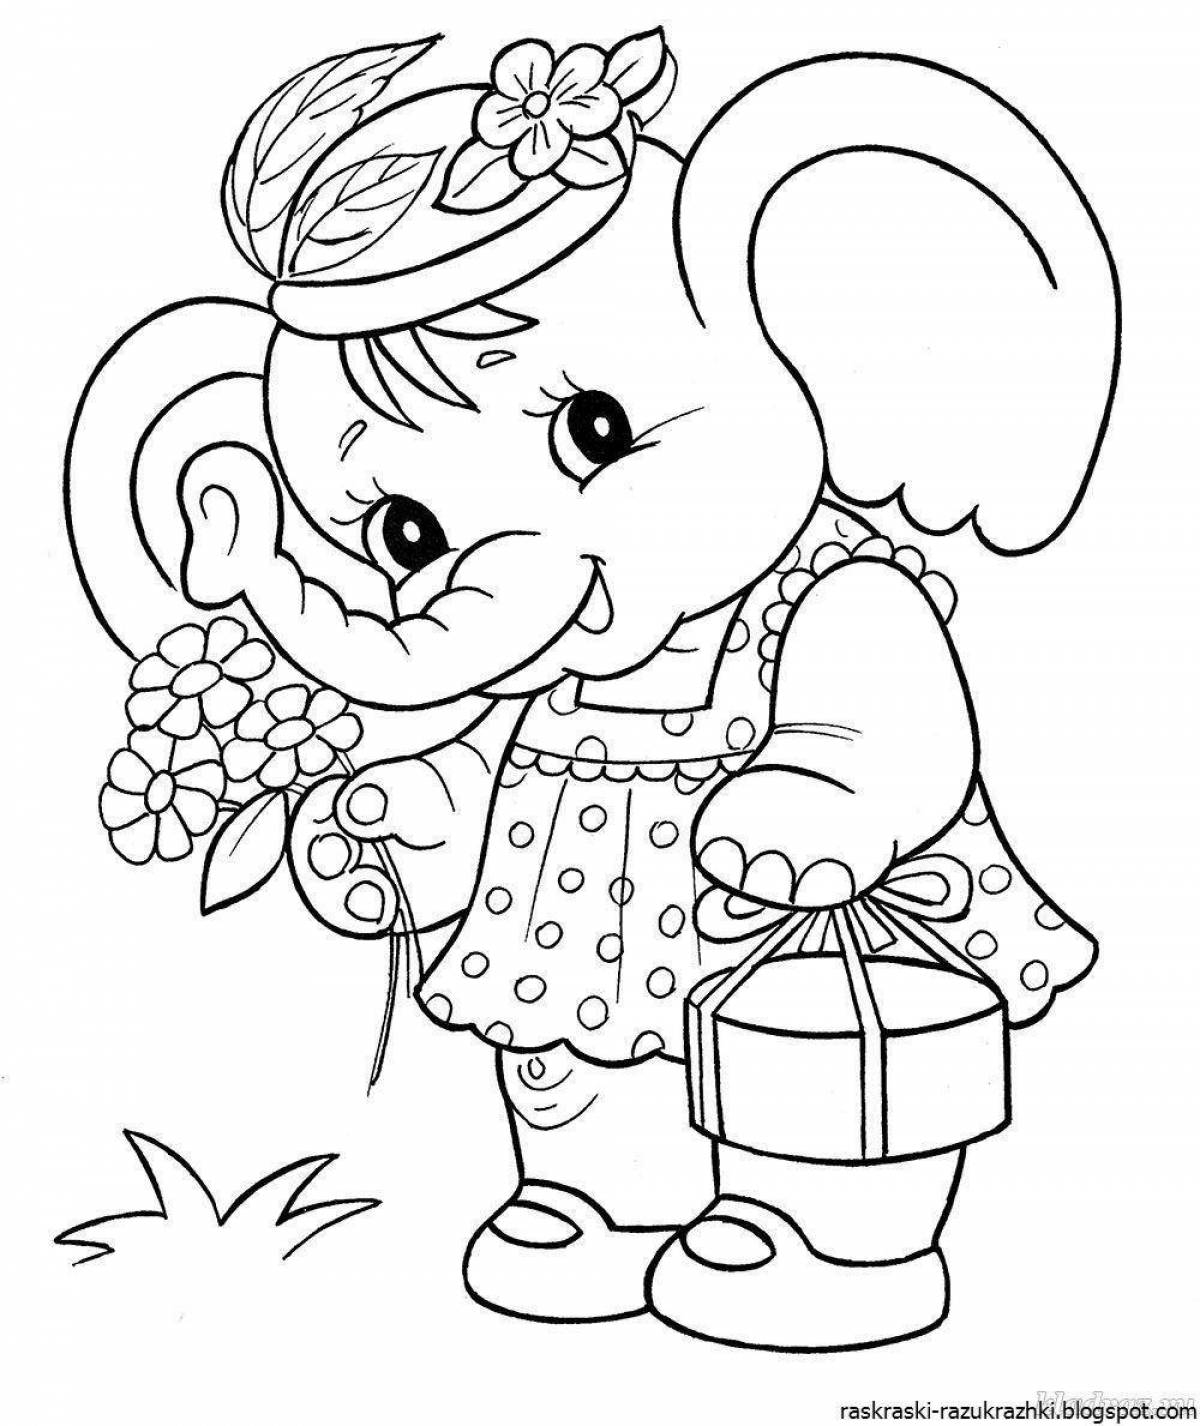 Color-explosion coloring page coloring book for children